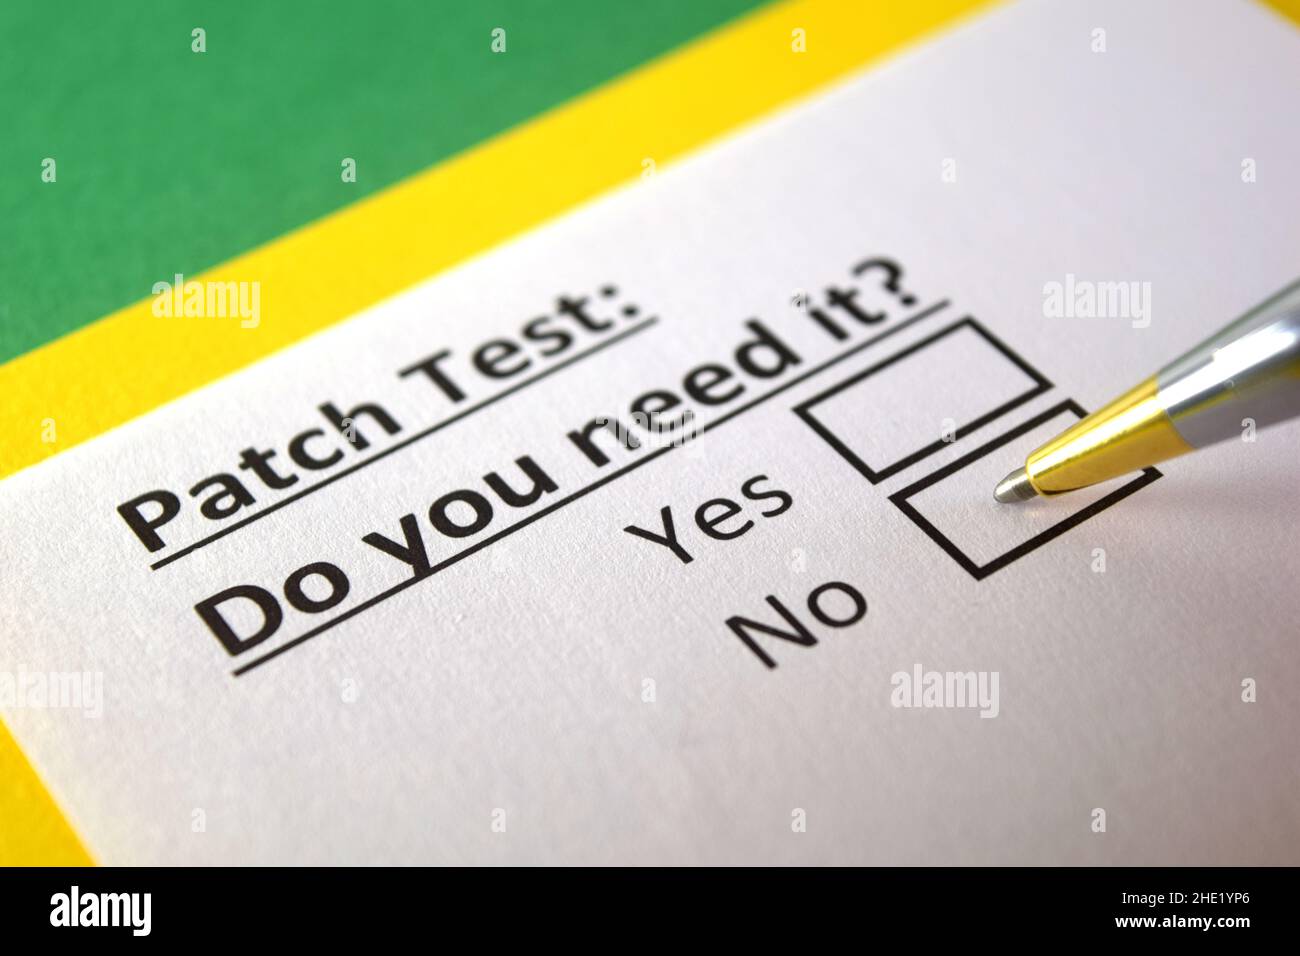 One person is answering question about patch test. Stock Photo